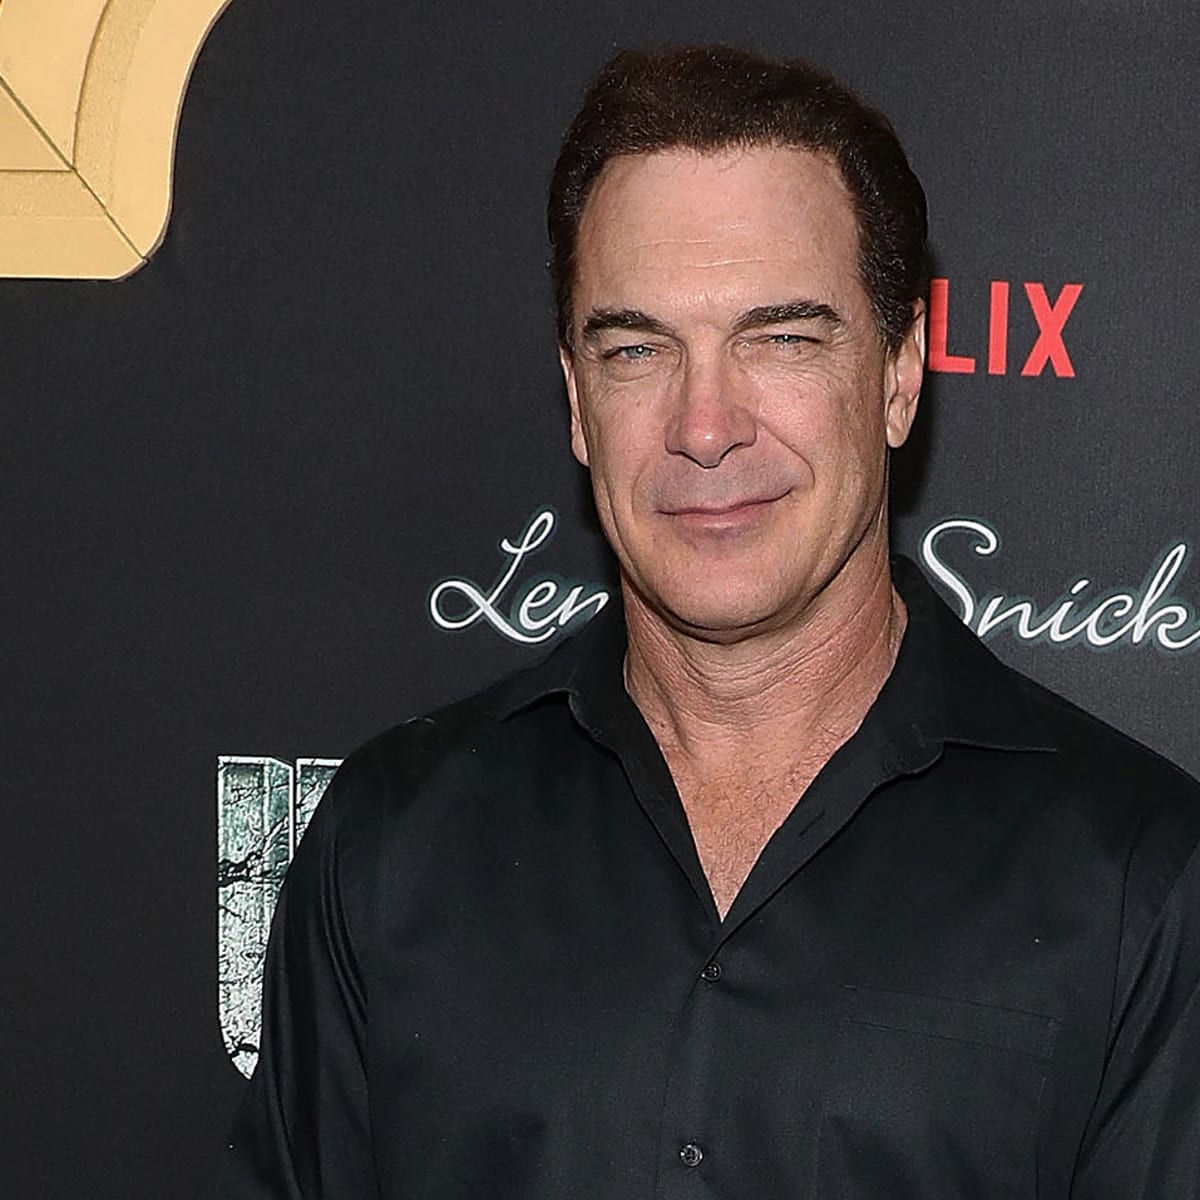 Seinfeld” actor Patrick Warburton shows up at New Jersey Devils